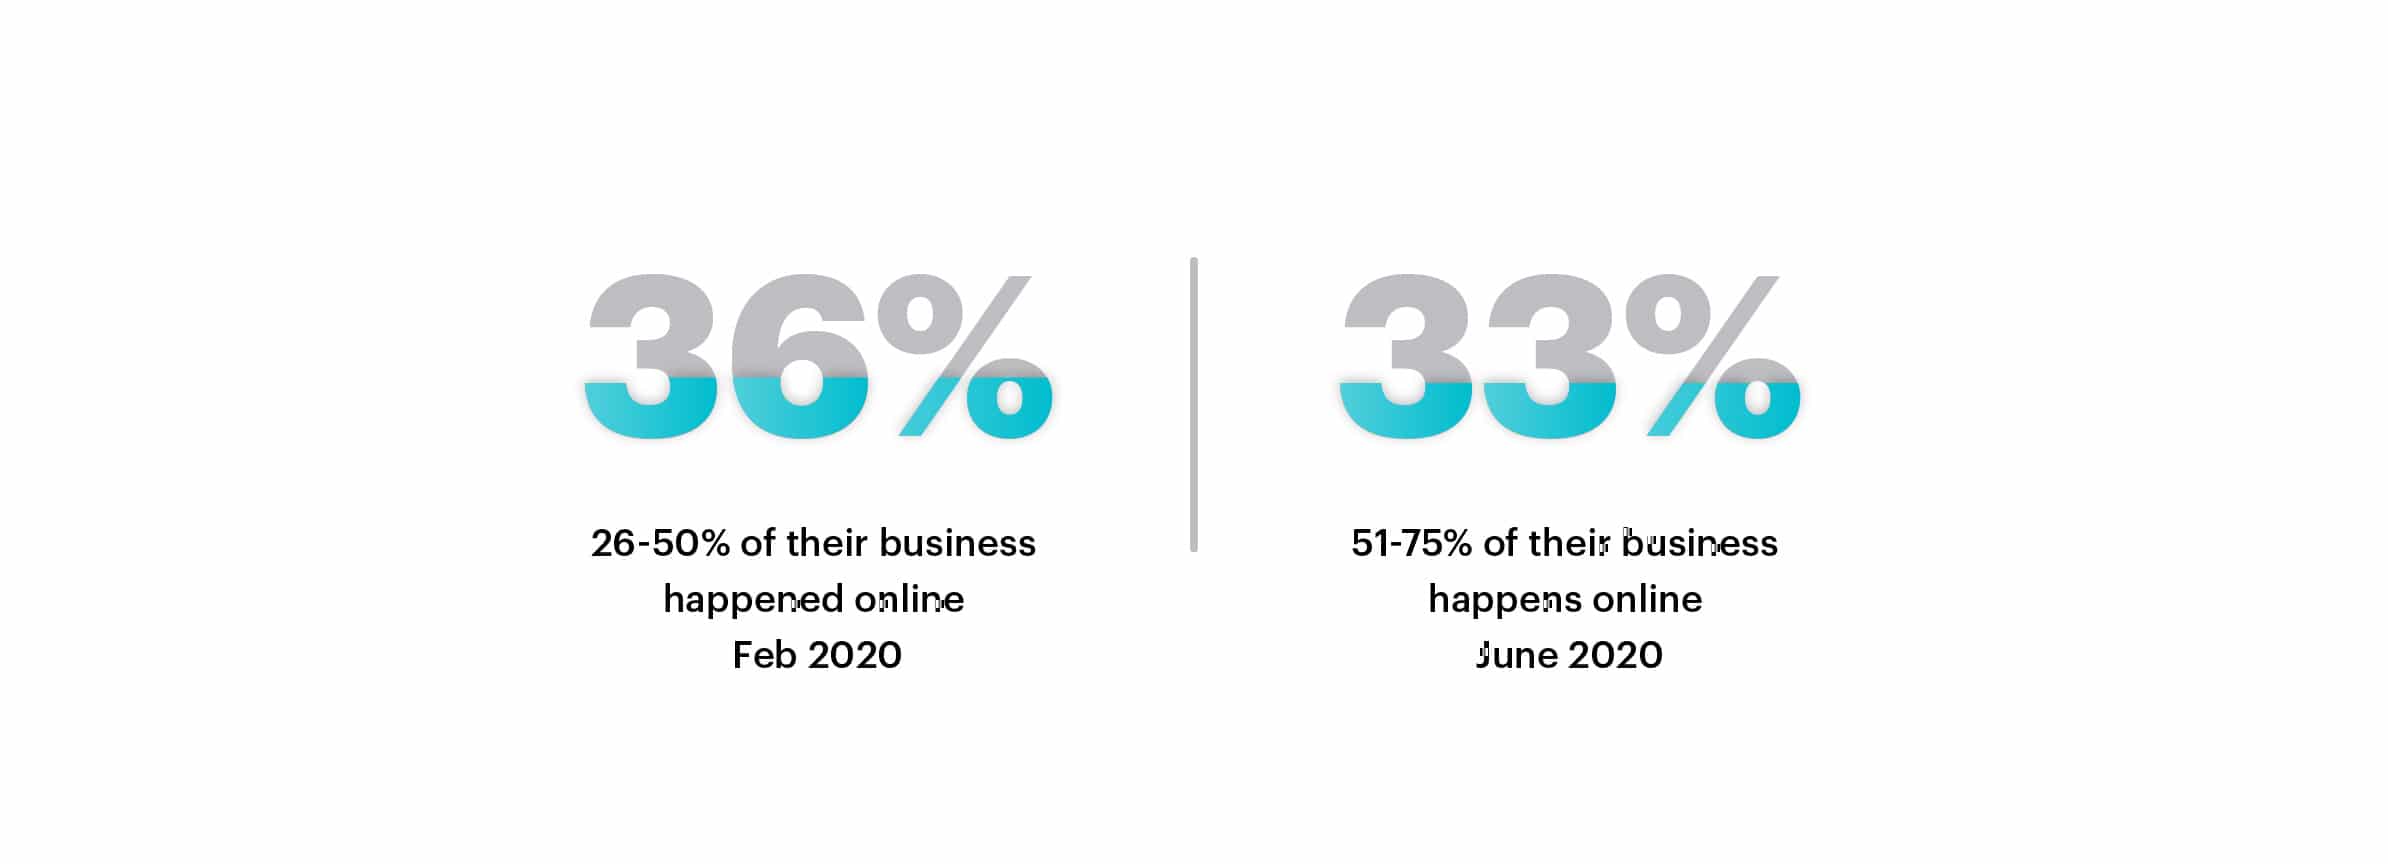  36% said 26-50% of their business happened online in Feb 2020 and 33% said 51-75% of their business happens online in June 2020